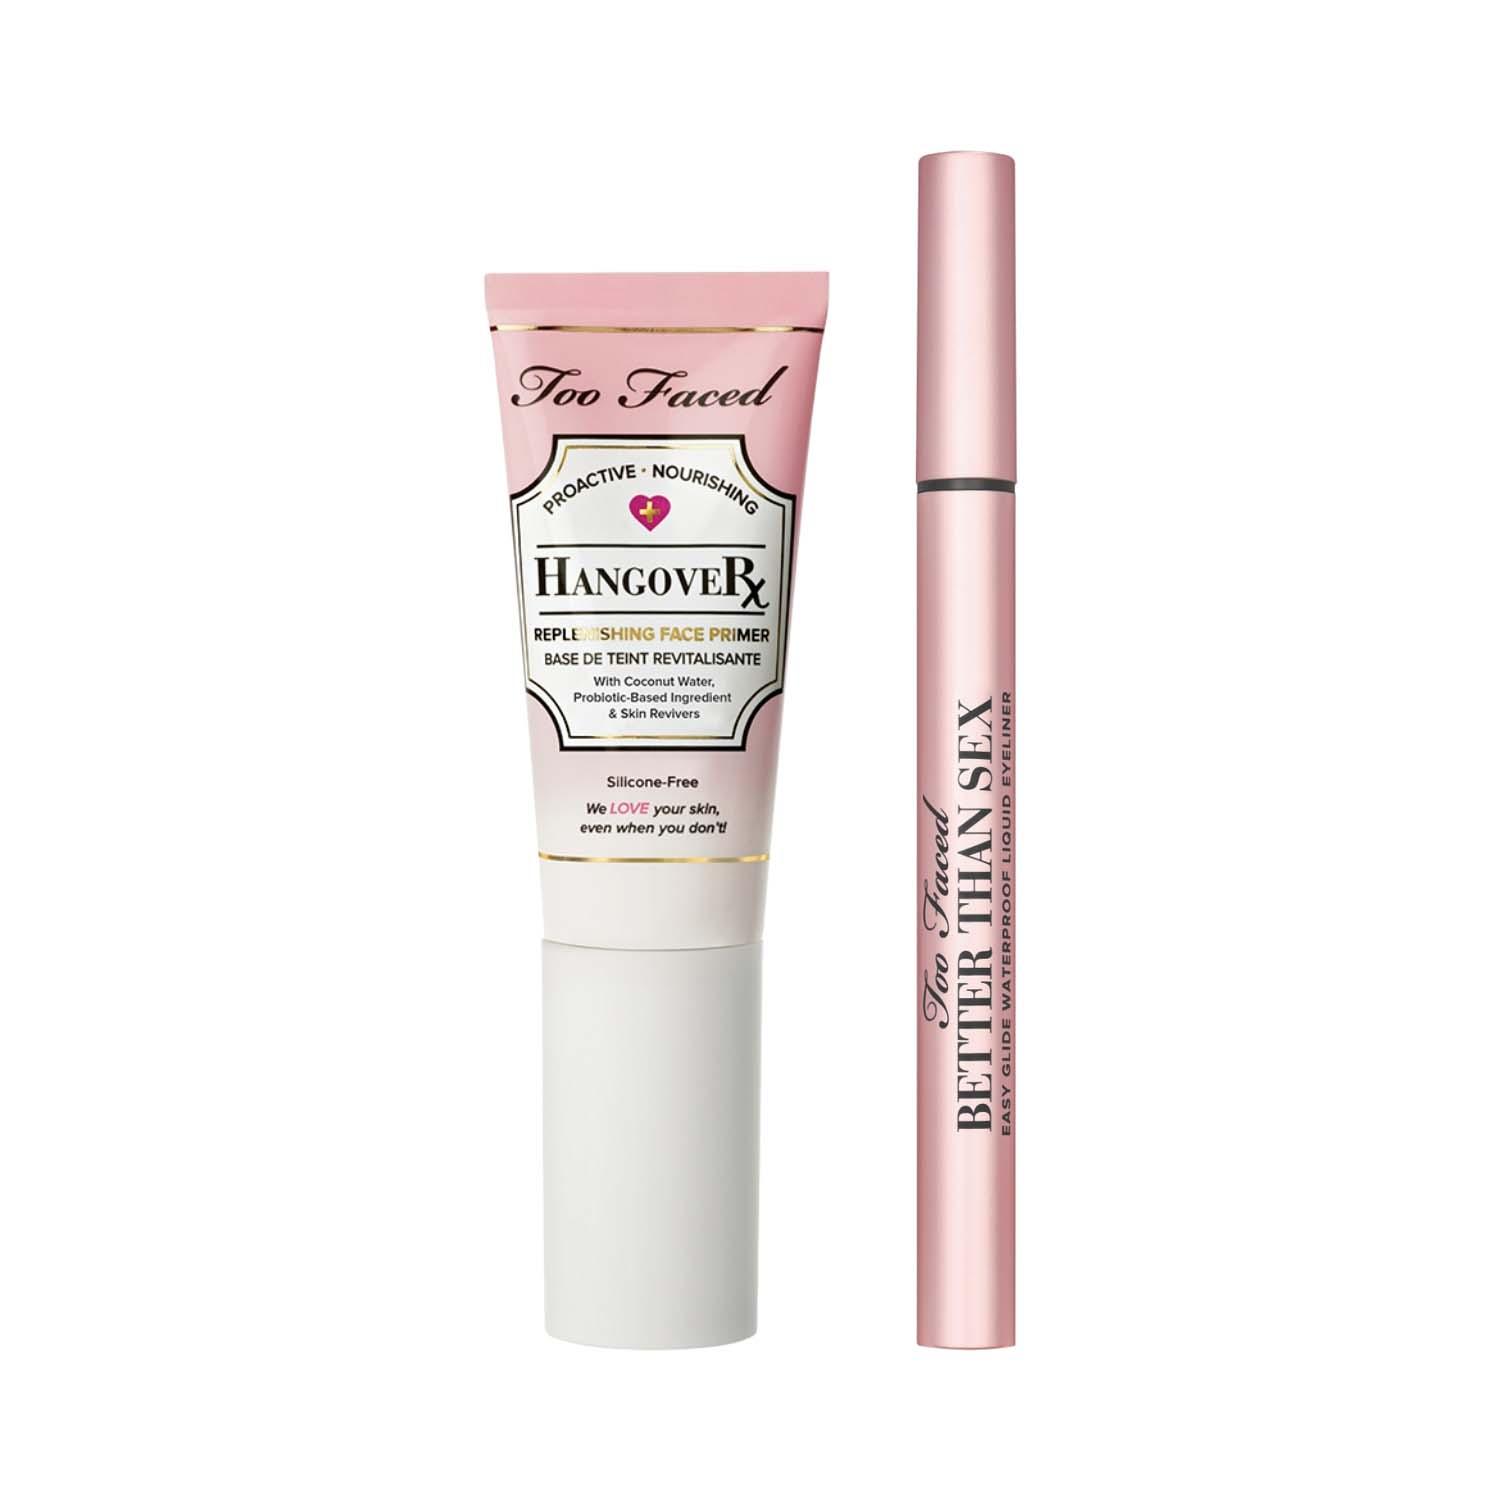 Too Faced Primer And Kajal Duo Combo